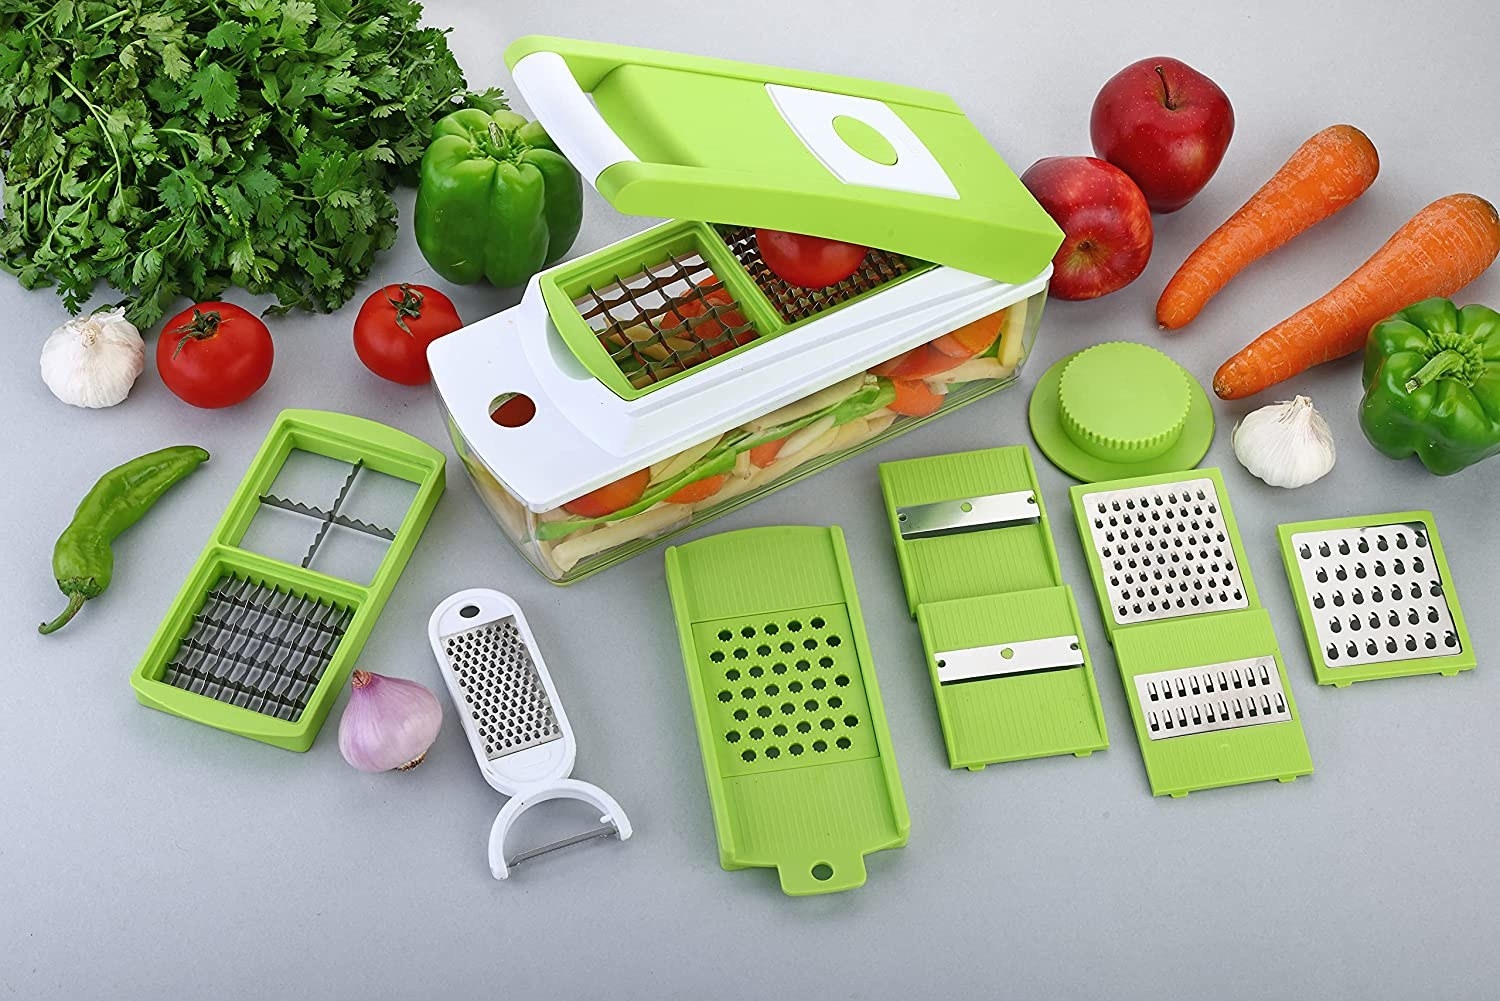 A vegetable chopper with different blades and vegetables